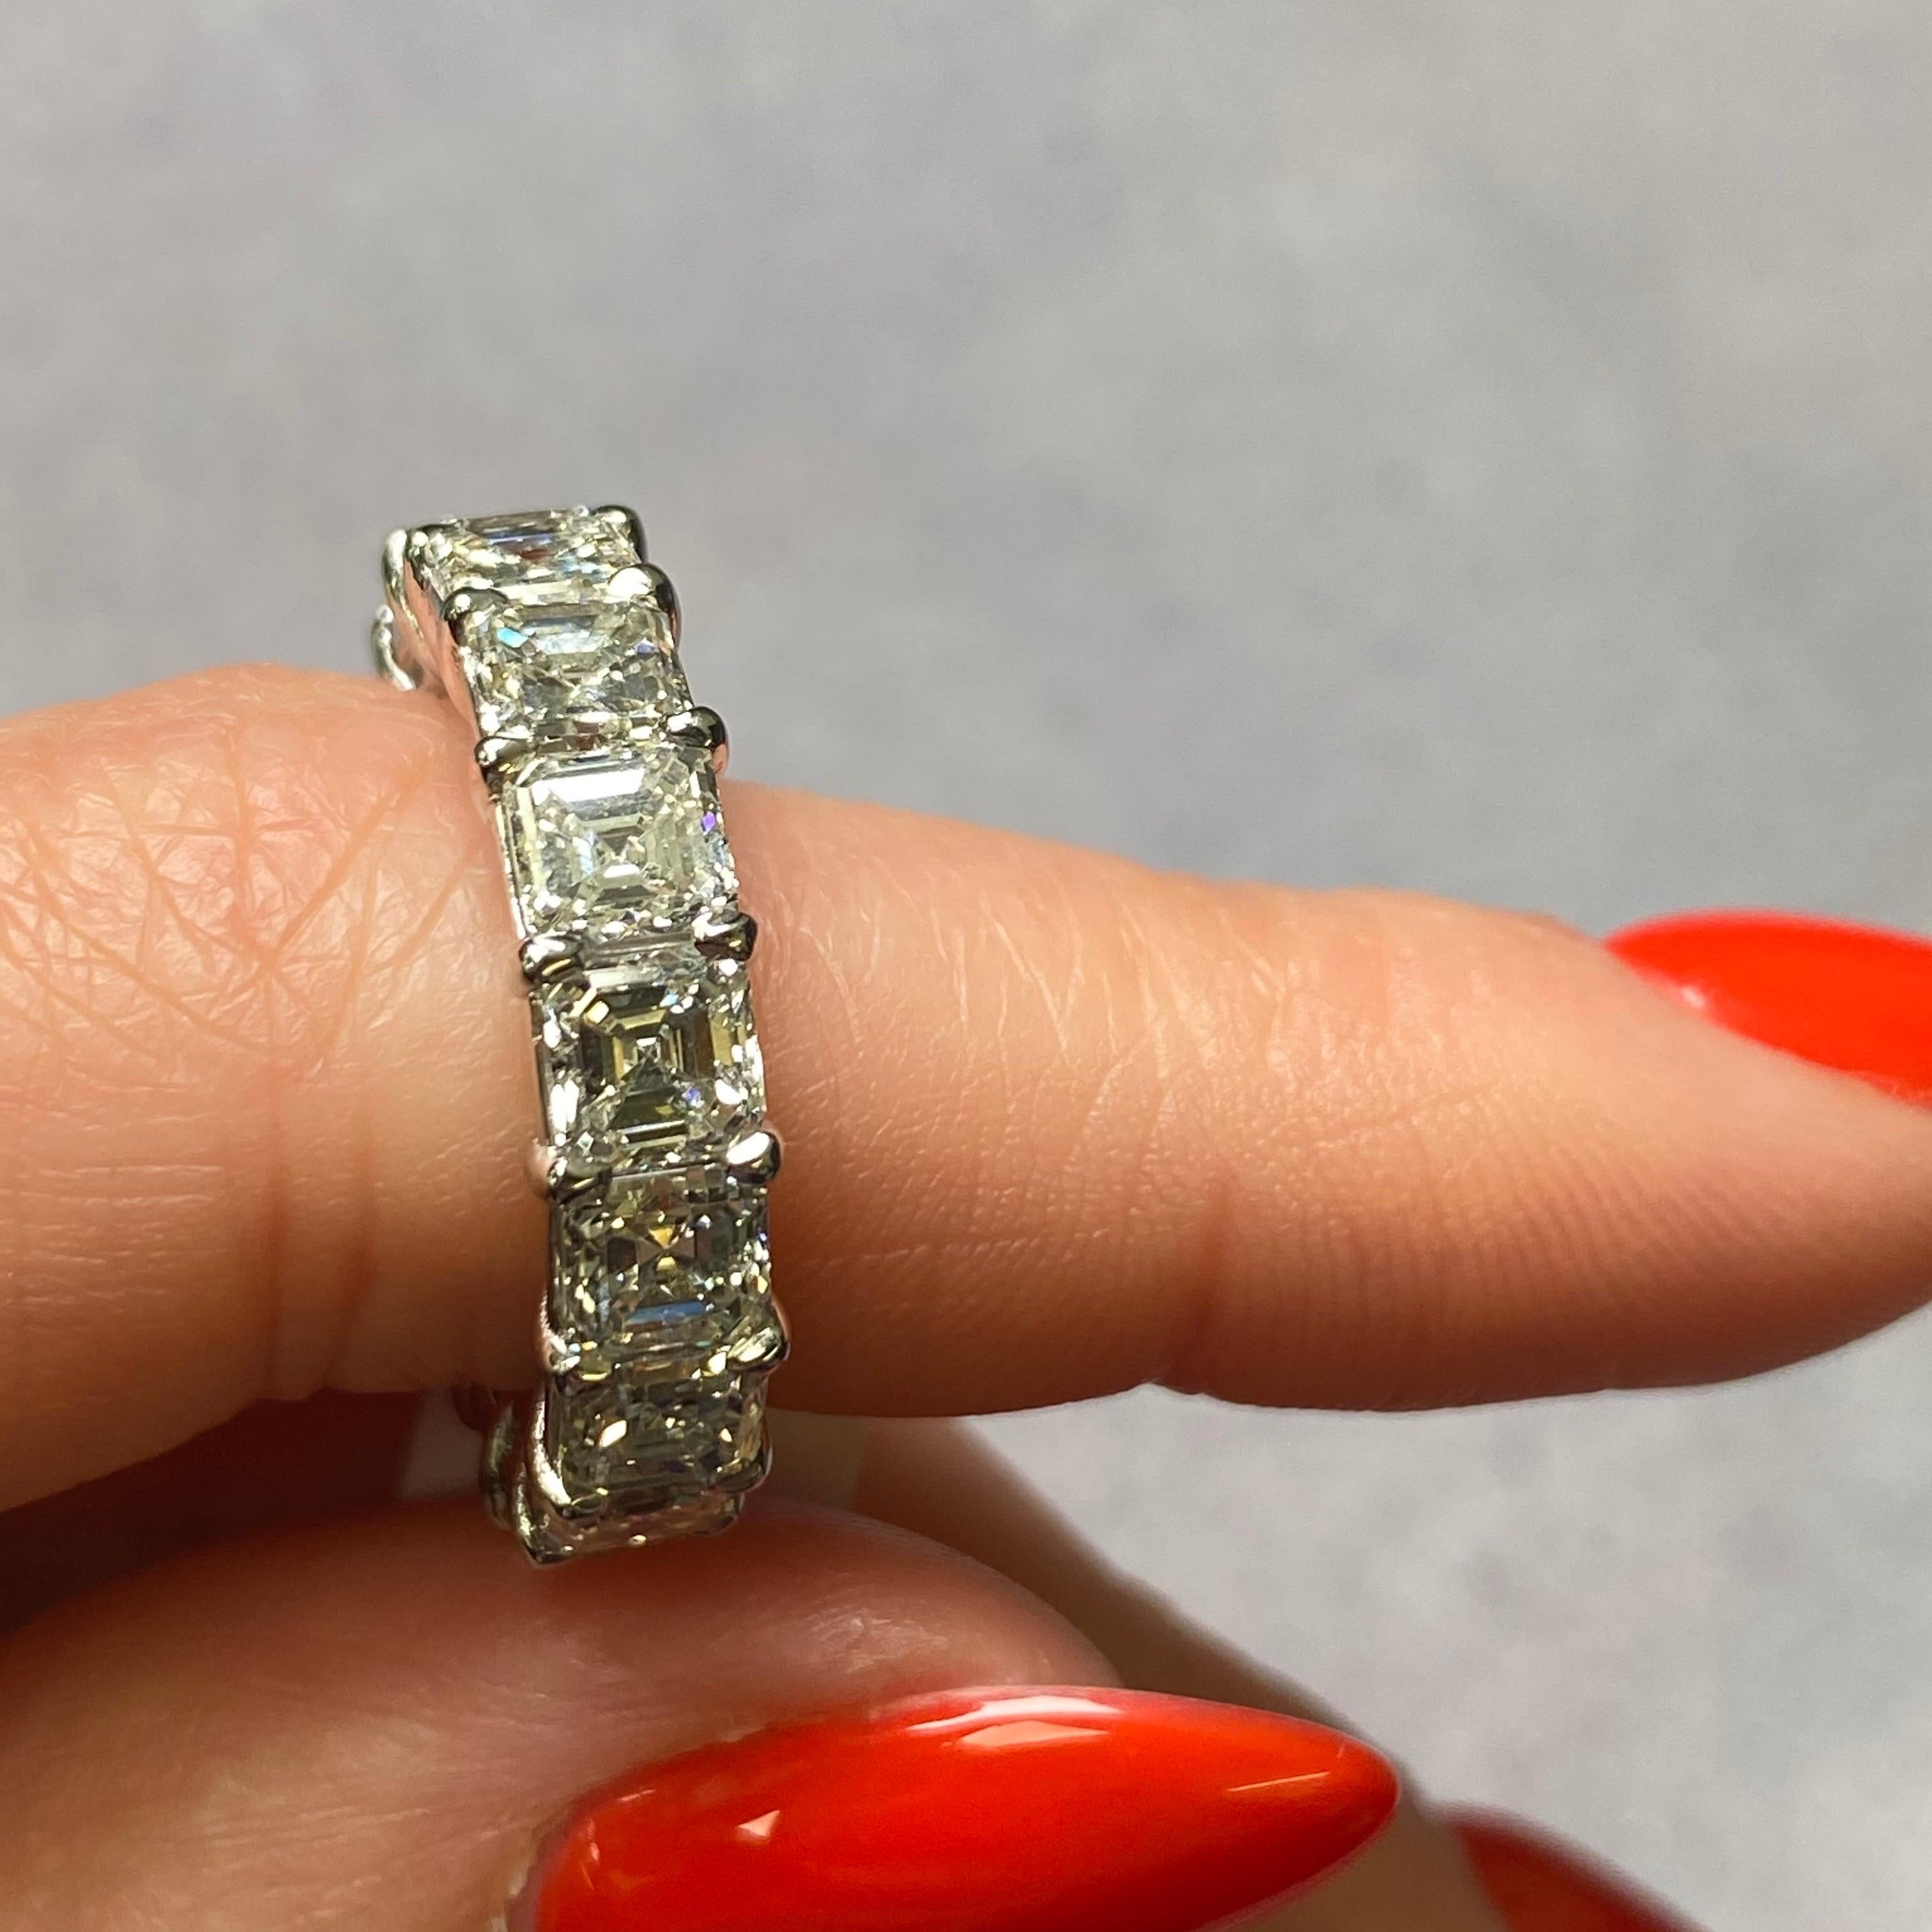 A dazzling circle of 8.13 cttw Asscher-cut diamonds set in stunning platinum eternity ring making it an ideal wedding ring or anniversary gift. Total of 16 beautiful diamonds. Diamond color F and VS clarity. Ring width: 5.60mm. Ring size 6. This